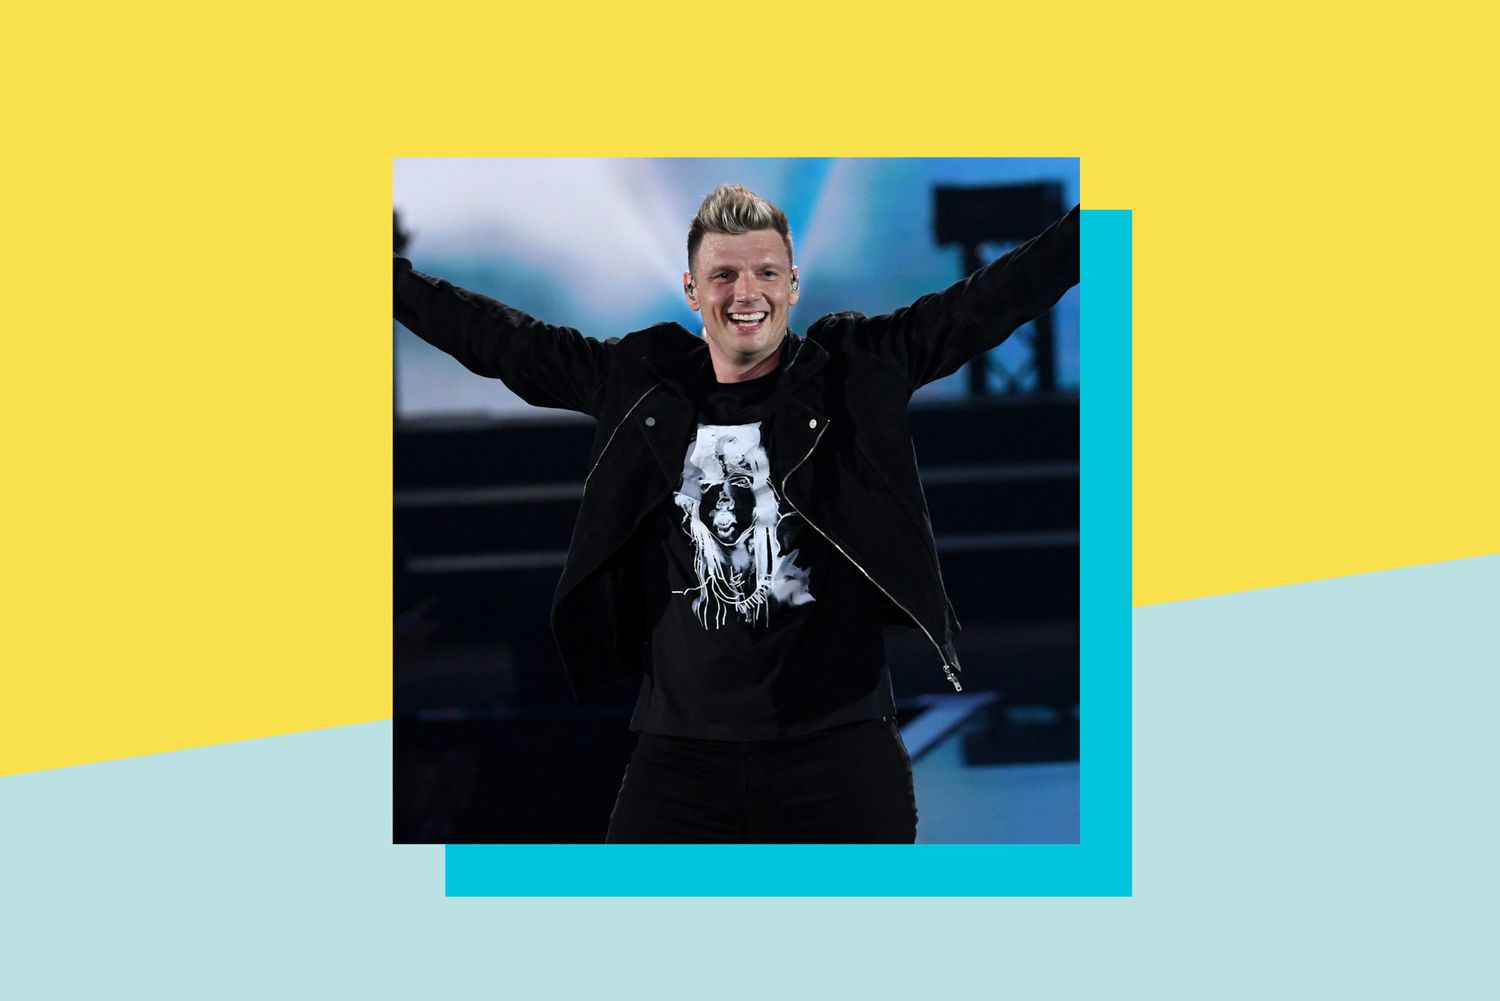 An image of Nick Carter on a colorful background.